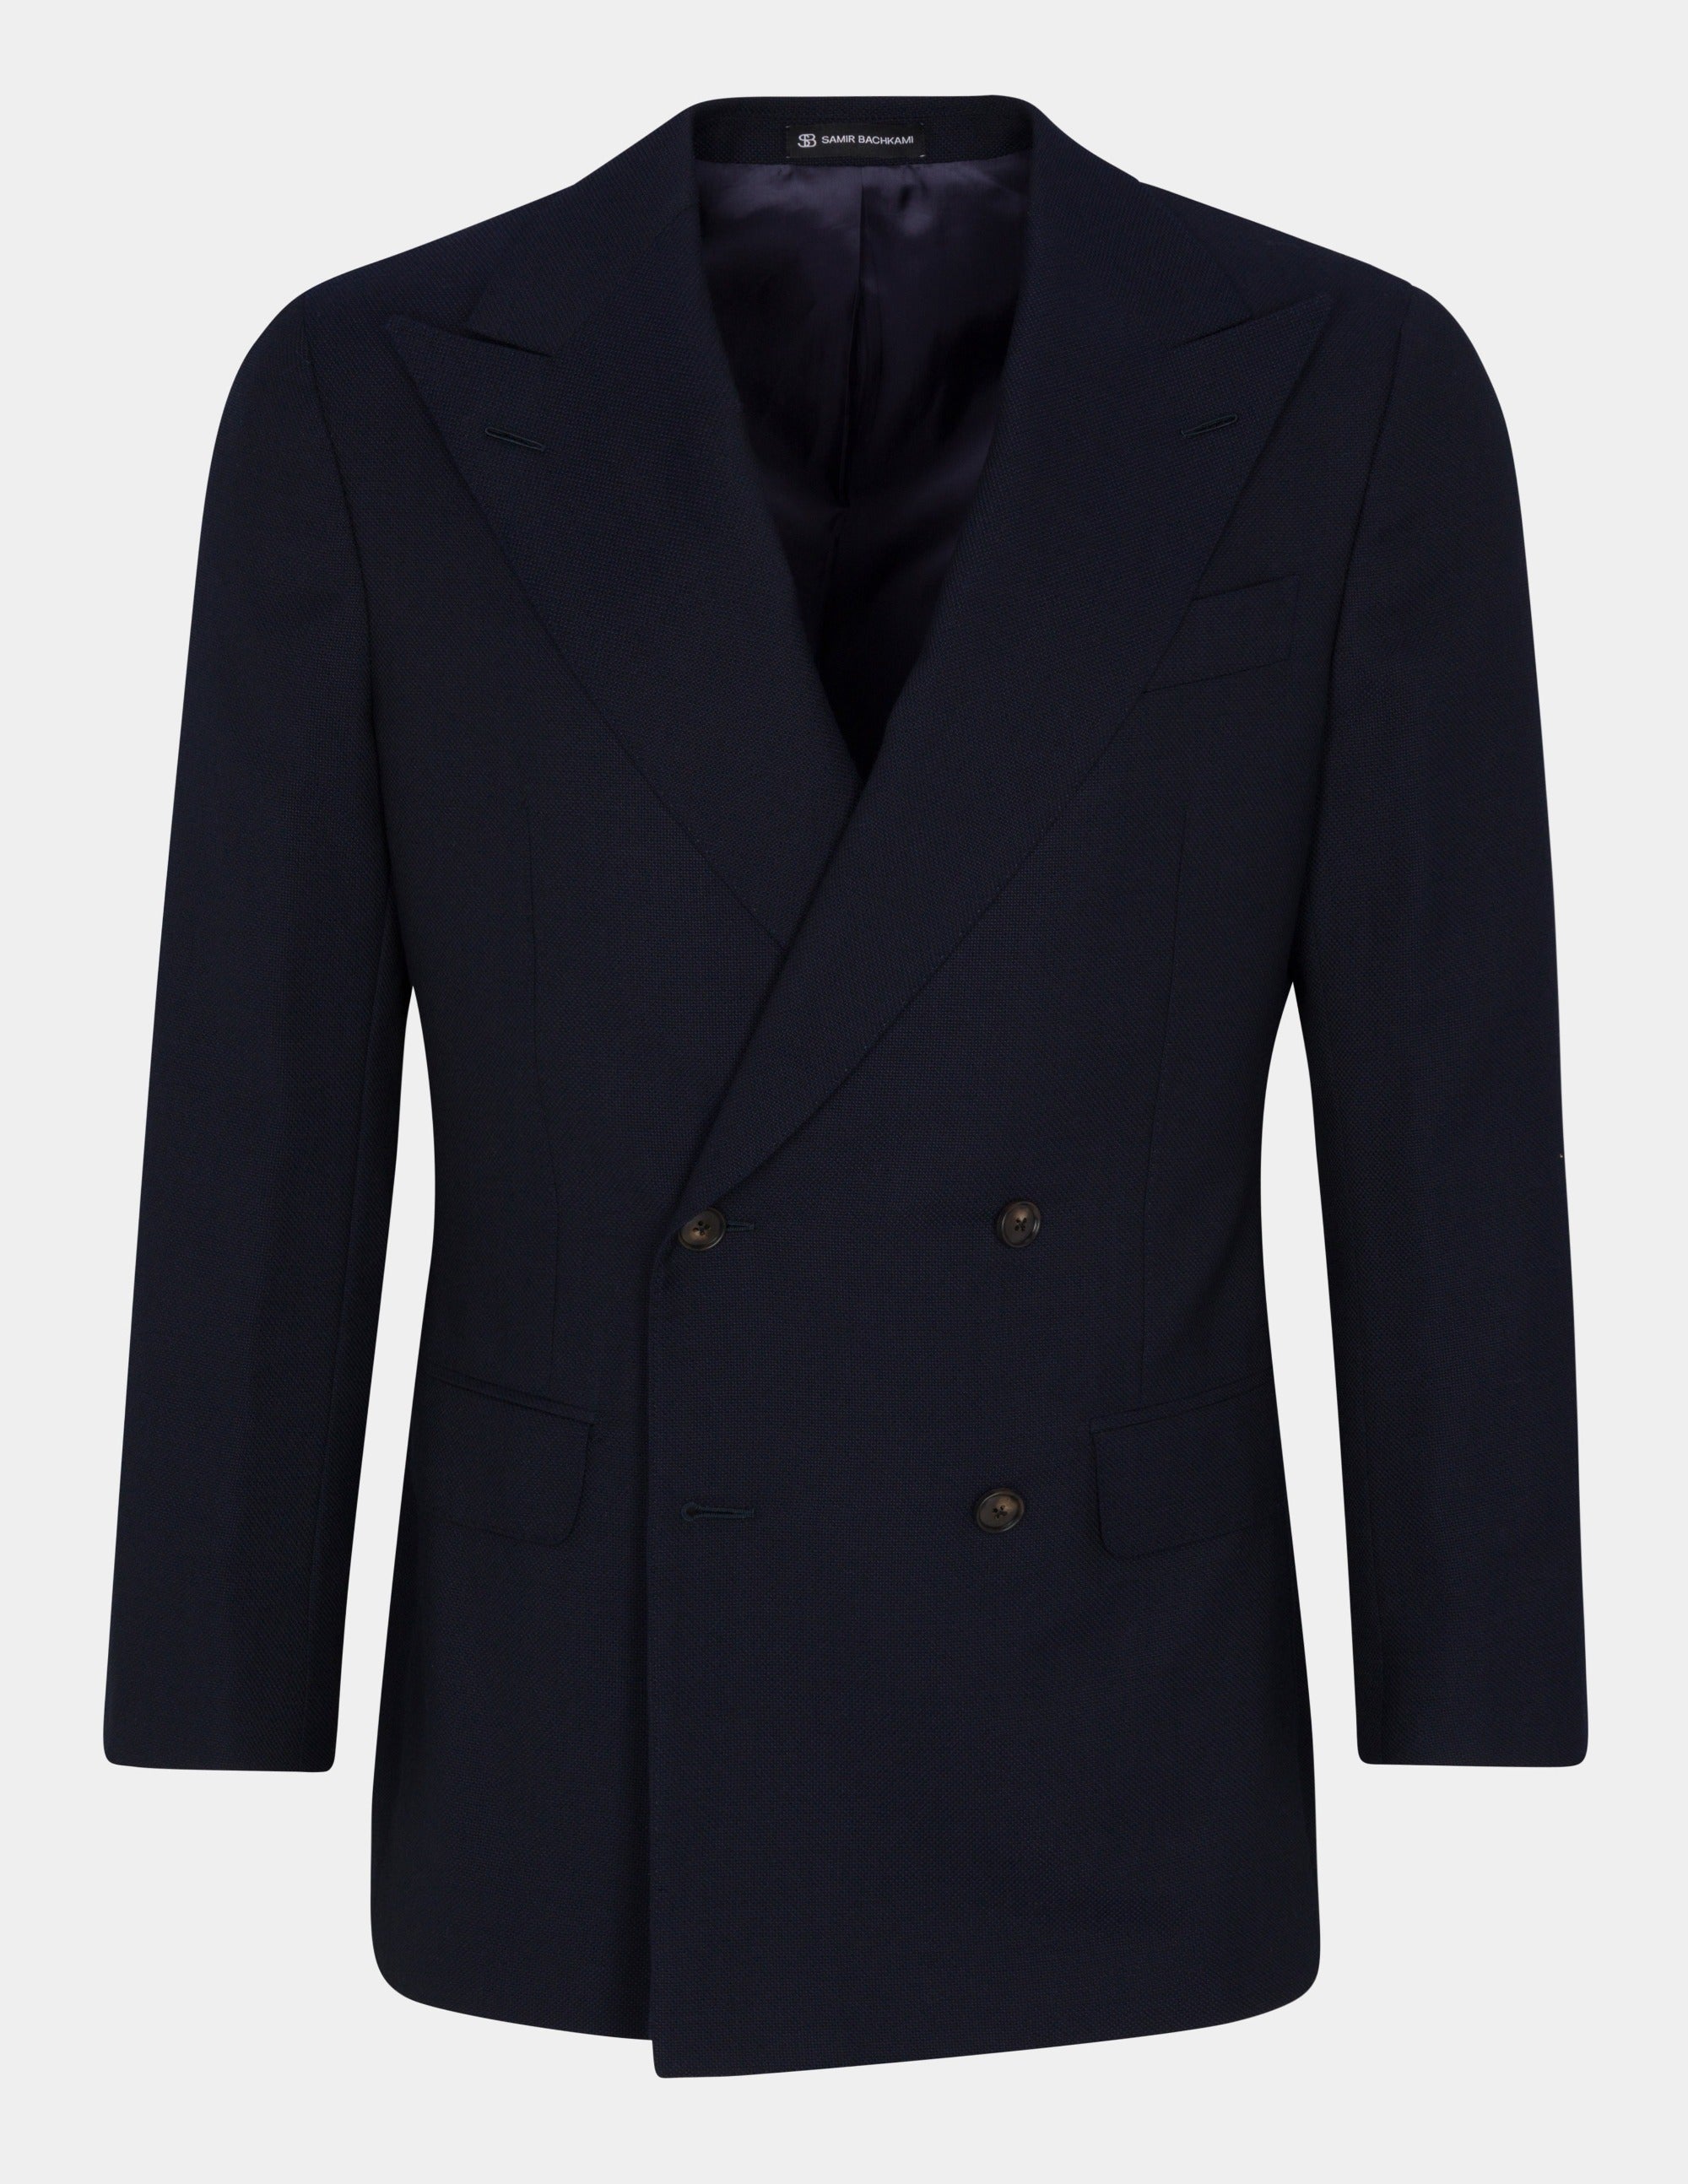 Navy Blue Double Breasted Suit - Samir Bachkami